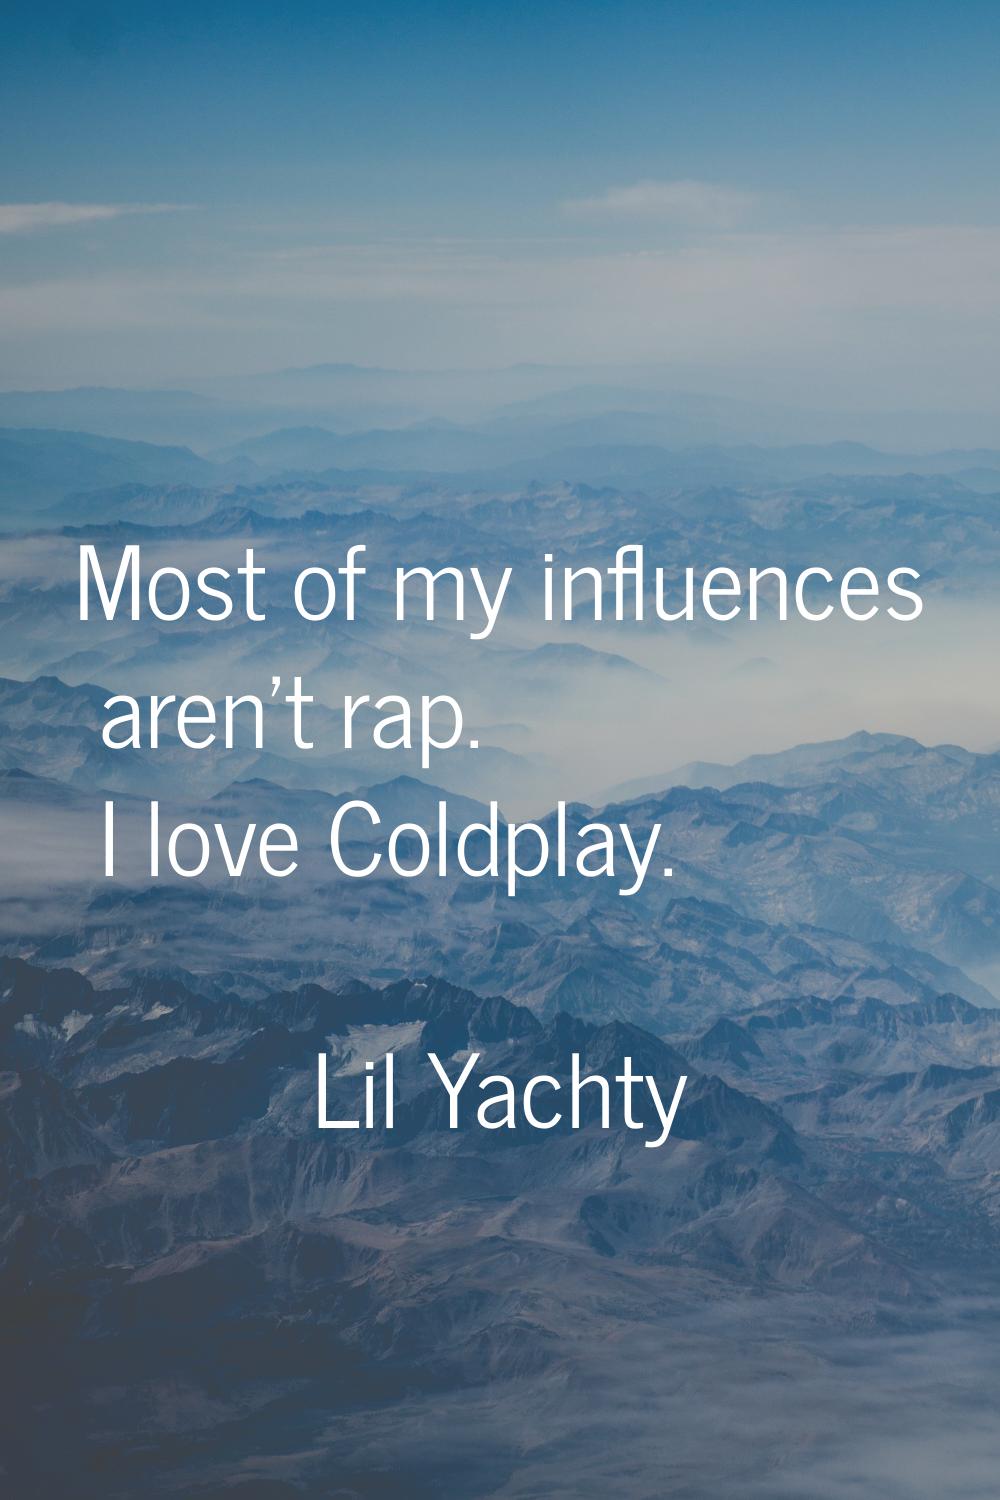 Most of my influences aren't rap. I love Coldplay.